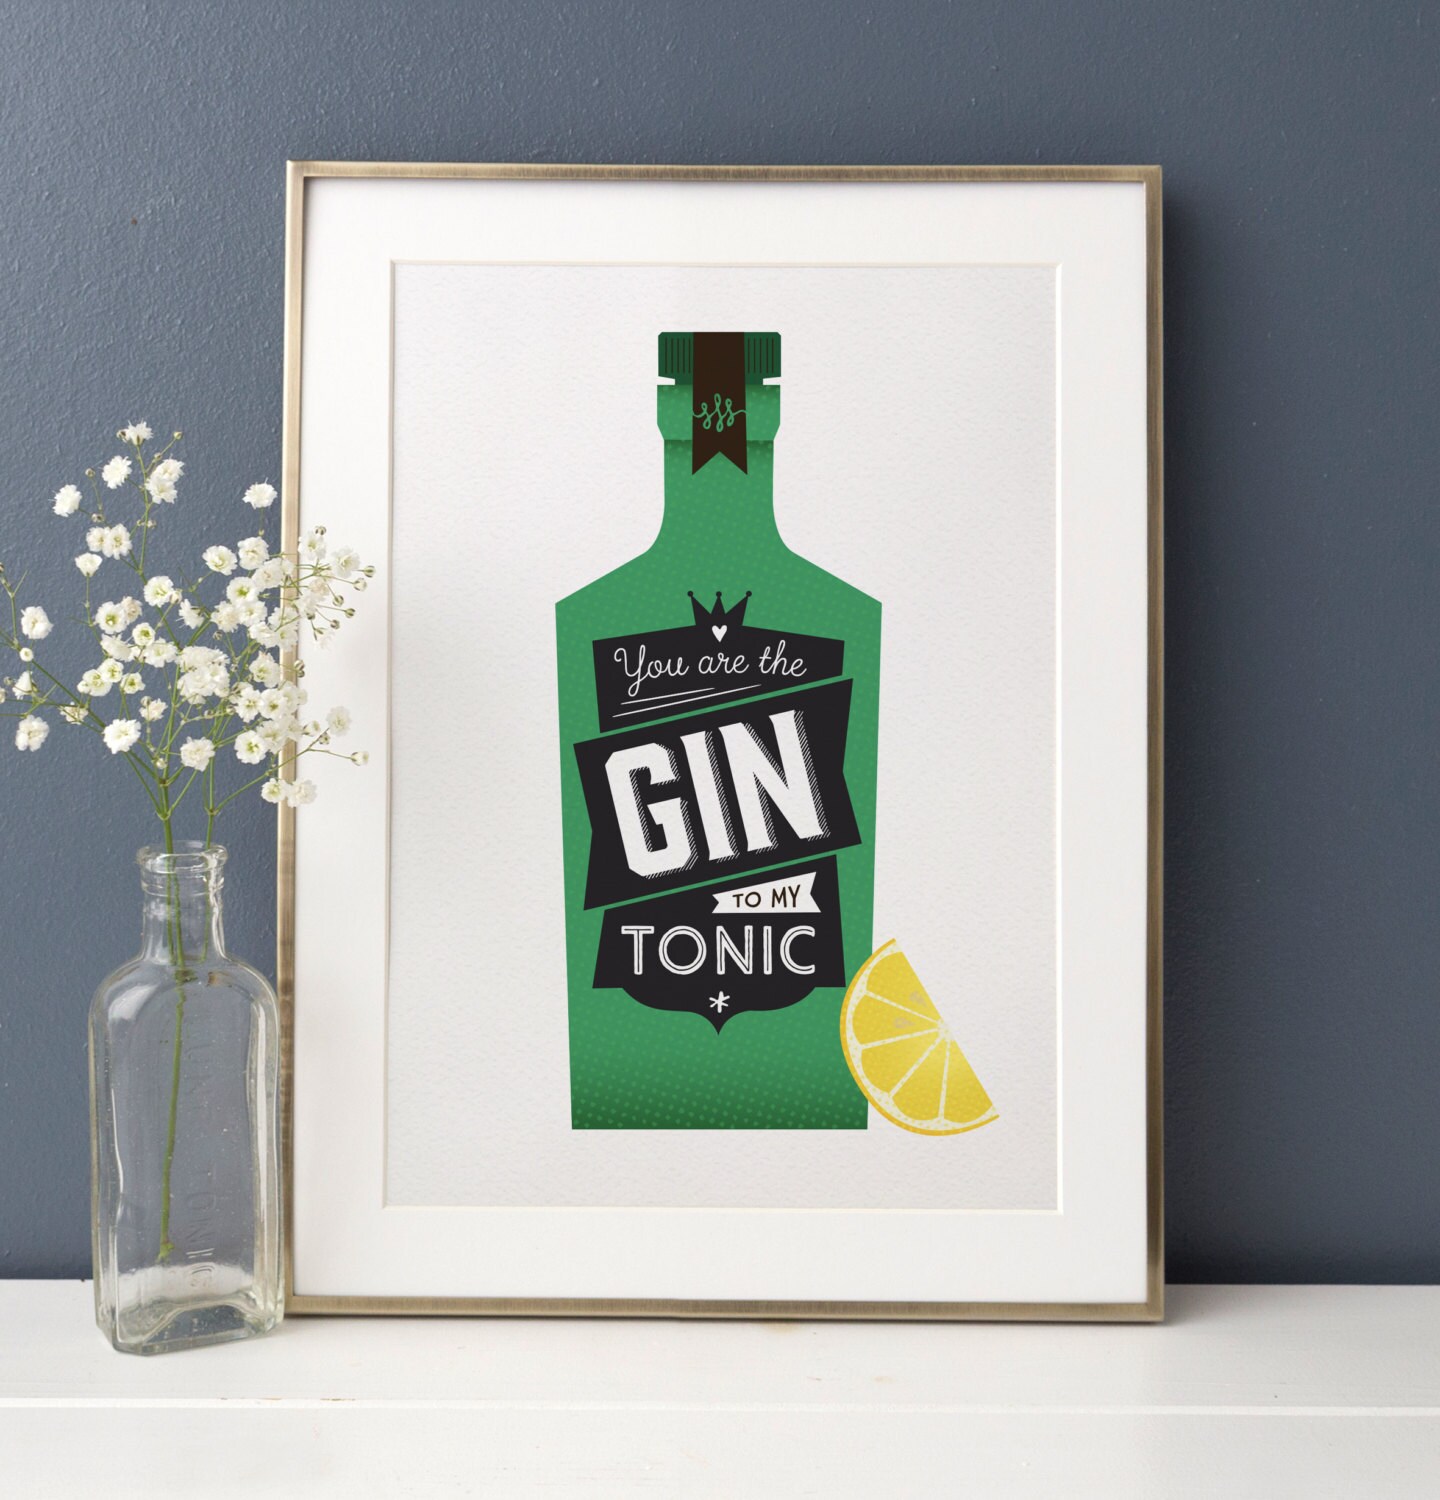 Gin Anniversary & Gin the My Tonic Are Her for to Poster, Gift - Etsy Design, Cocktail Gift, Kitchen Print, Vintage Print, Gin Retro Tonic, You